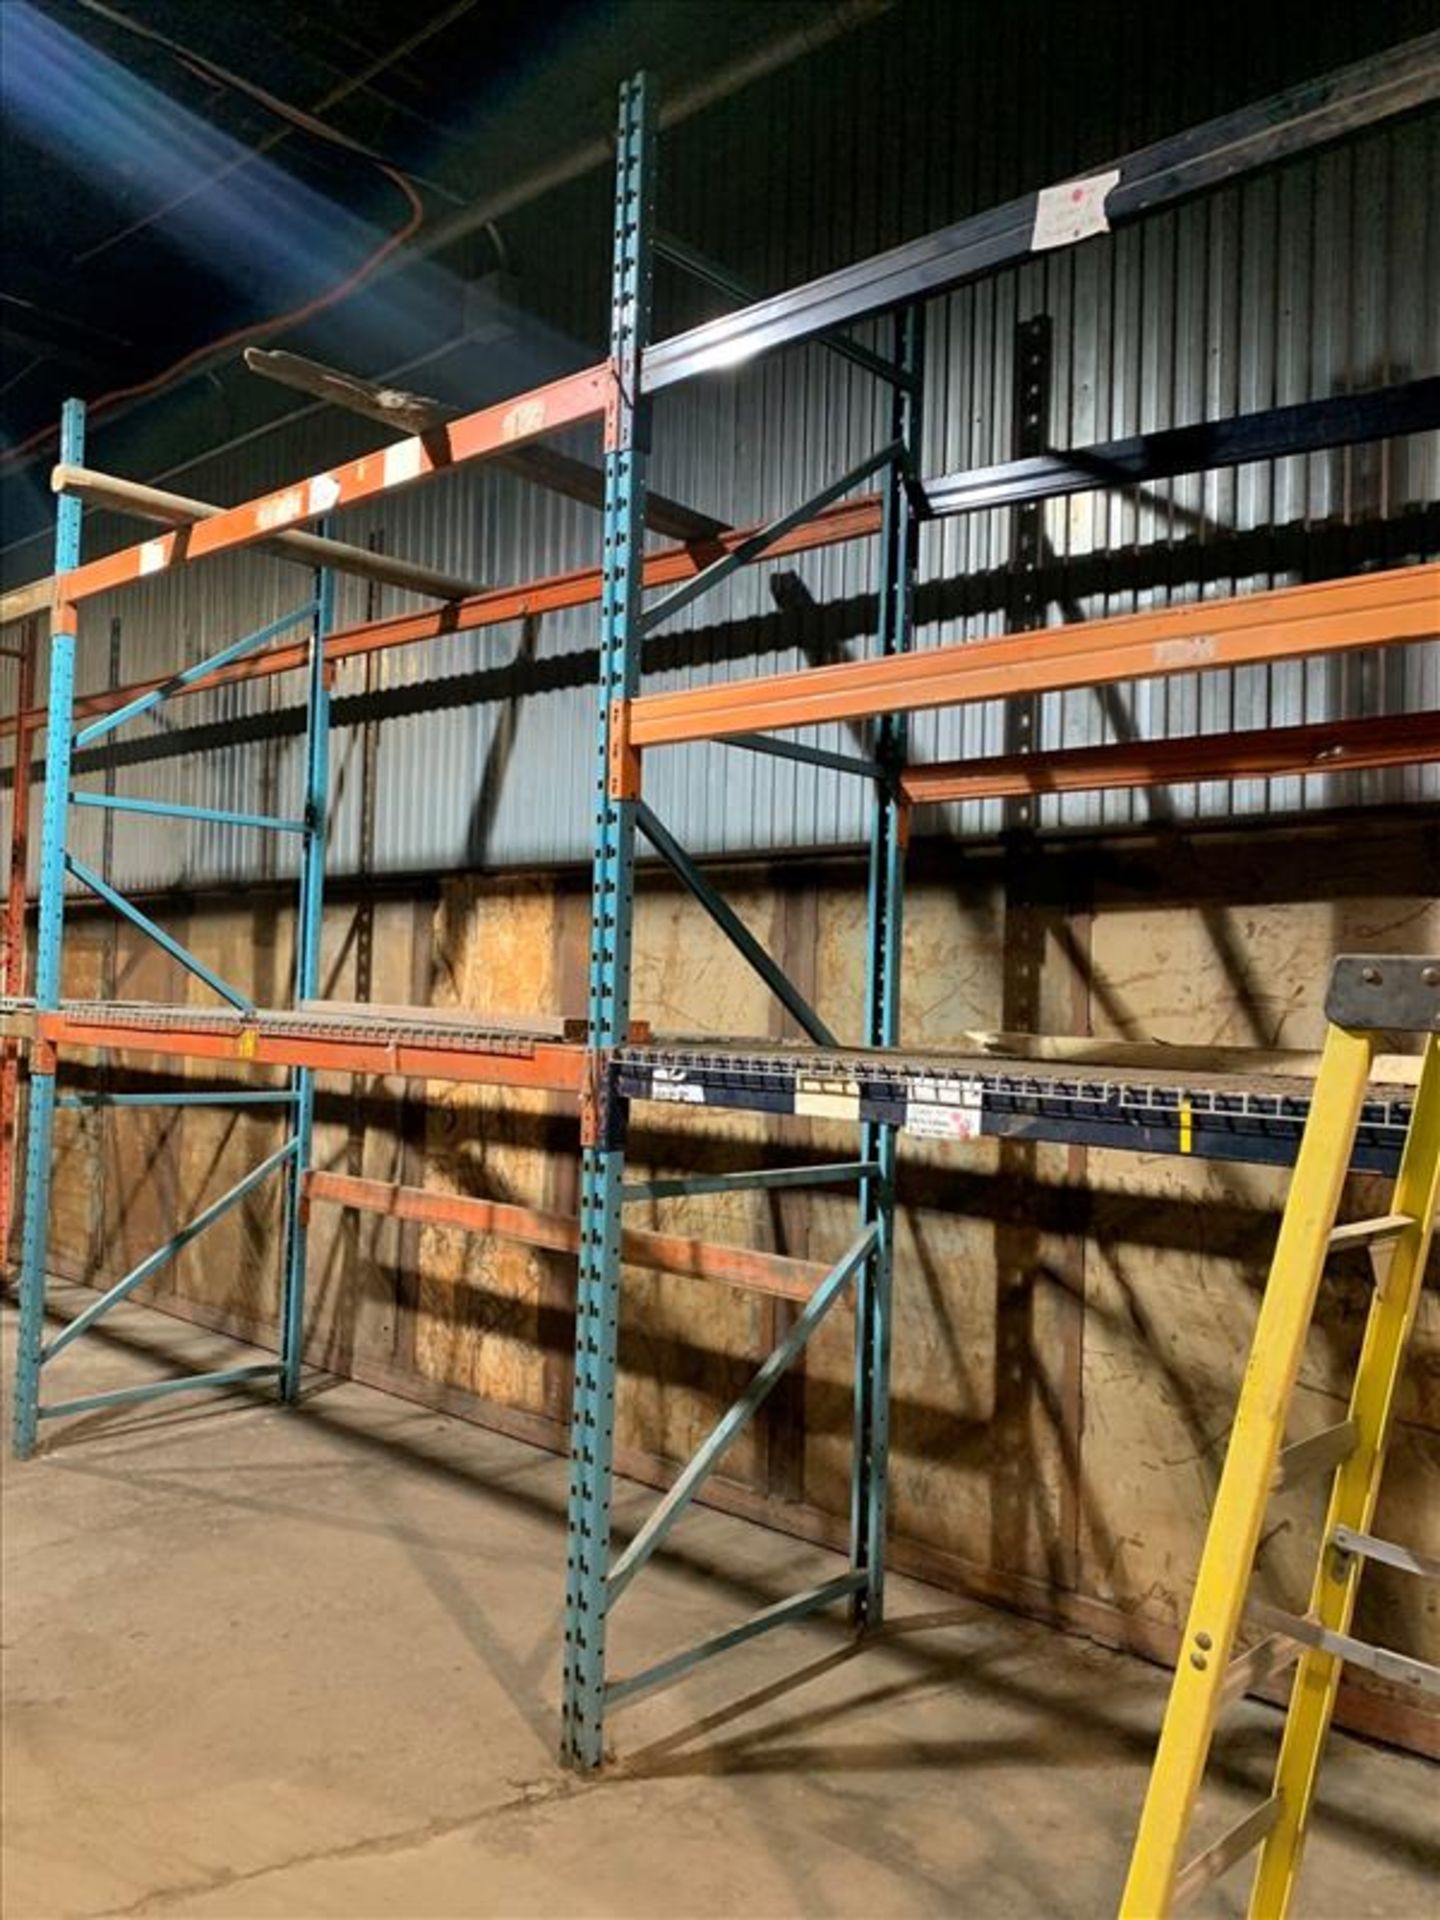 Pallet Racking approx. 126"H x 99"W x 42" D (Located in Parts Warehouse) - Image 2 of 4